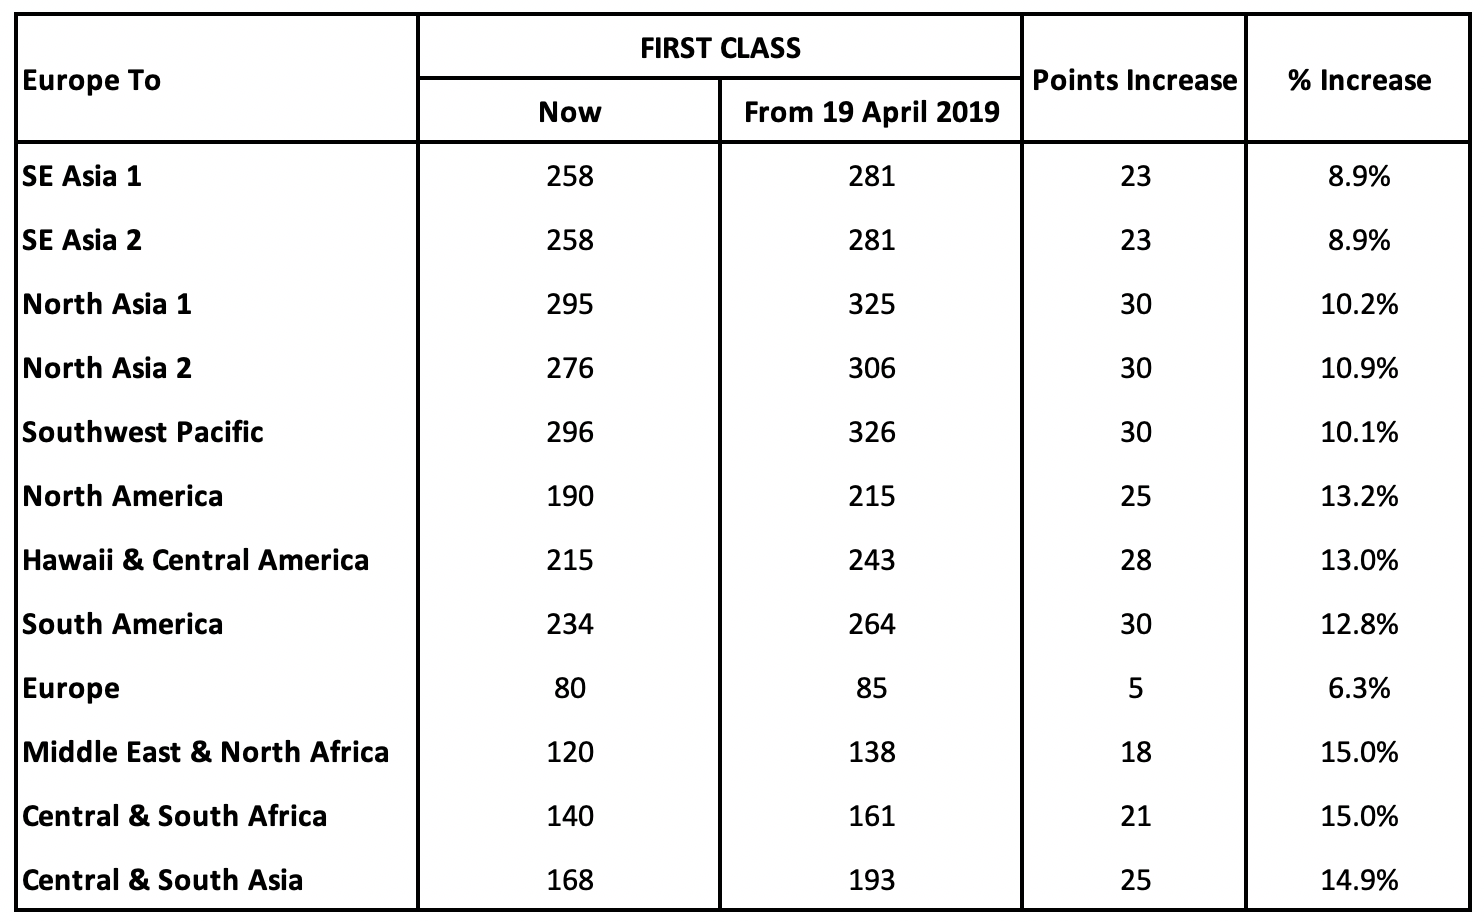 Singapore Airlines Star Alliance Award Chart